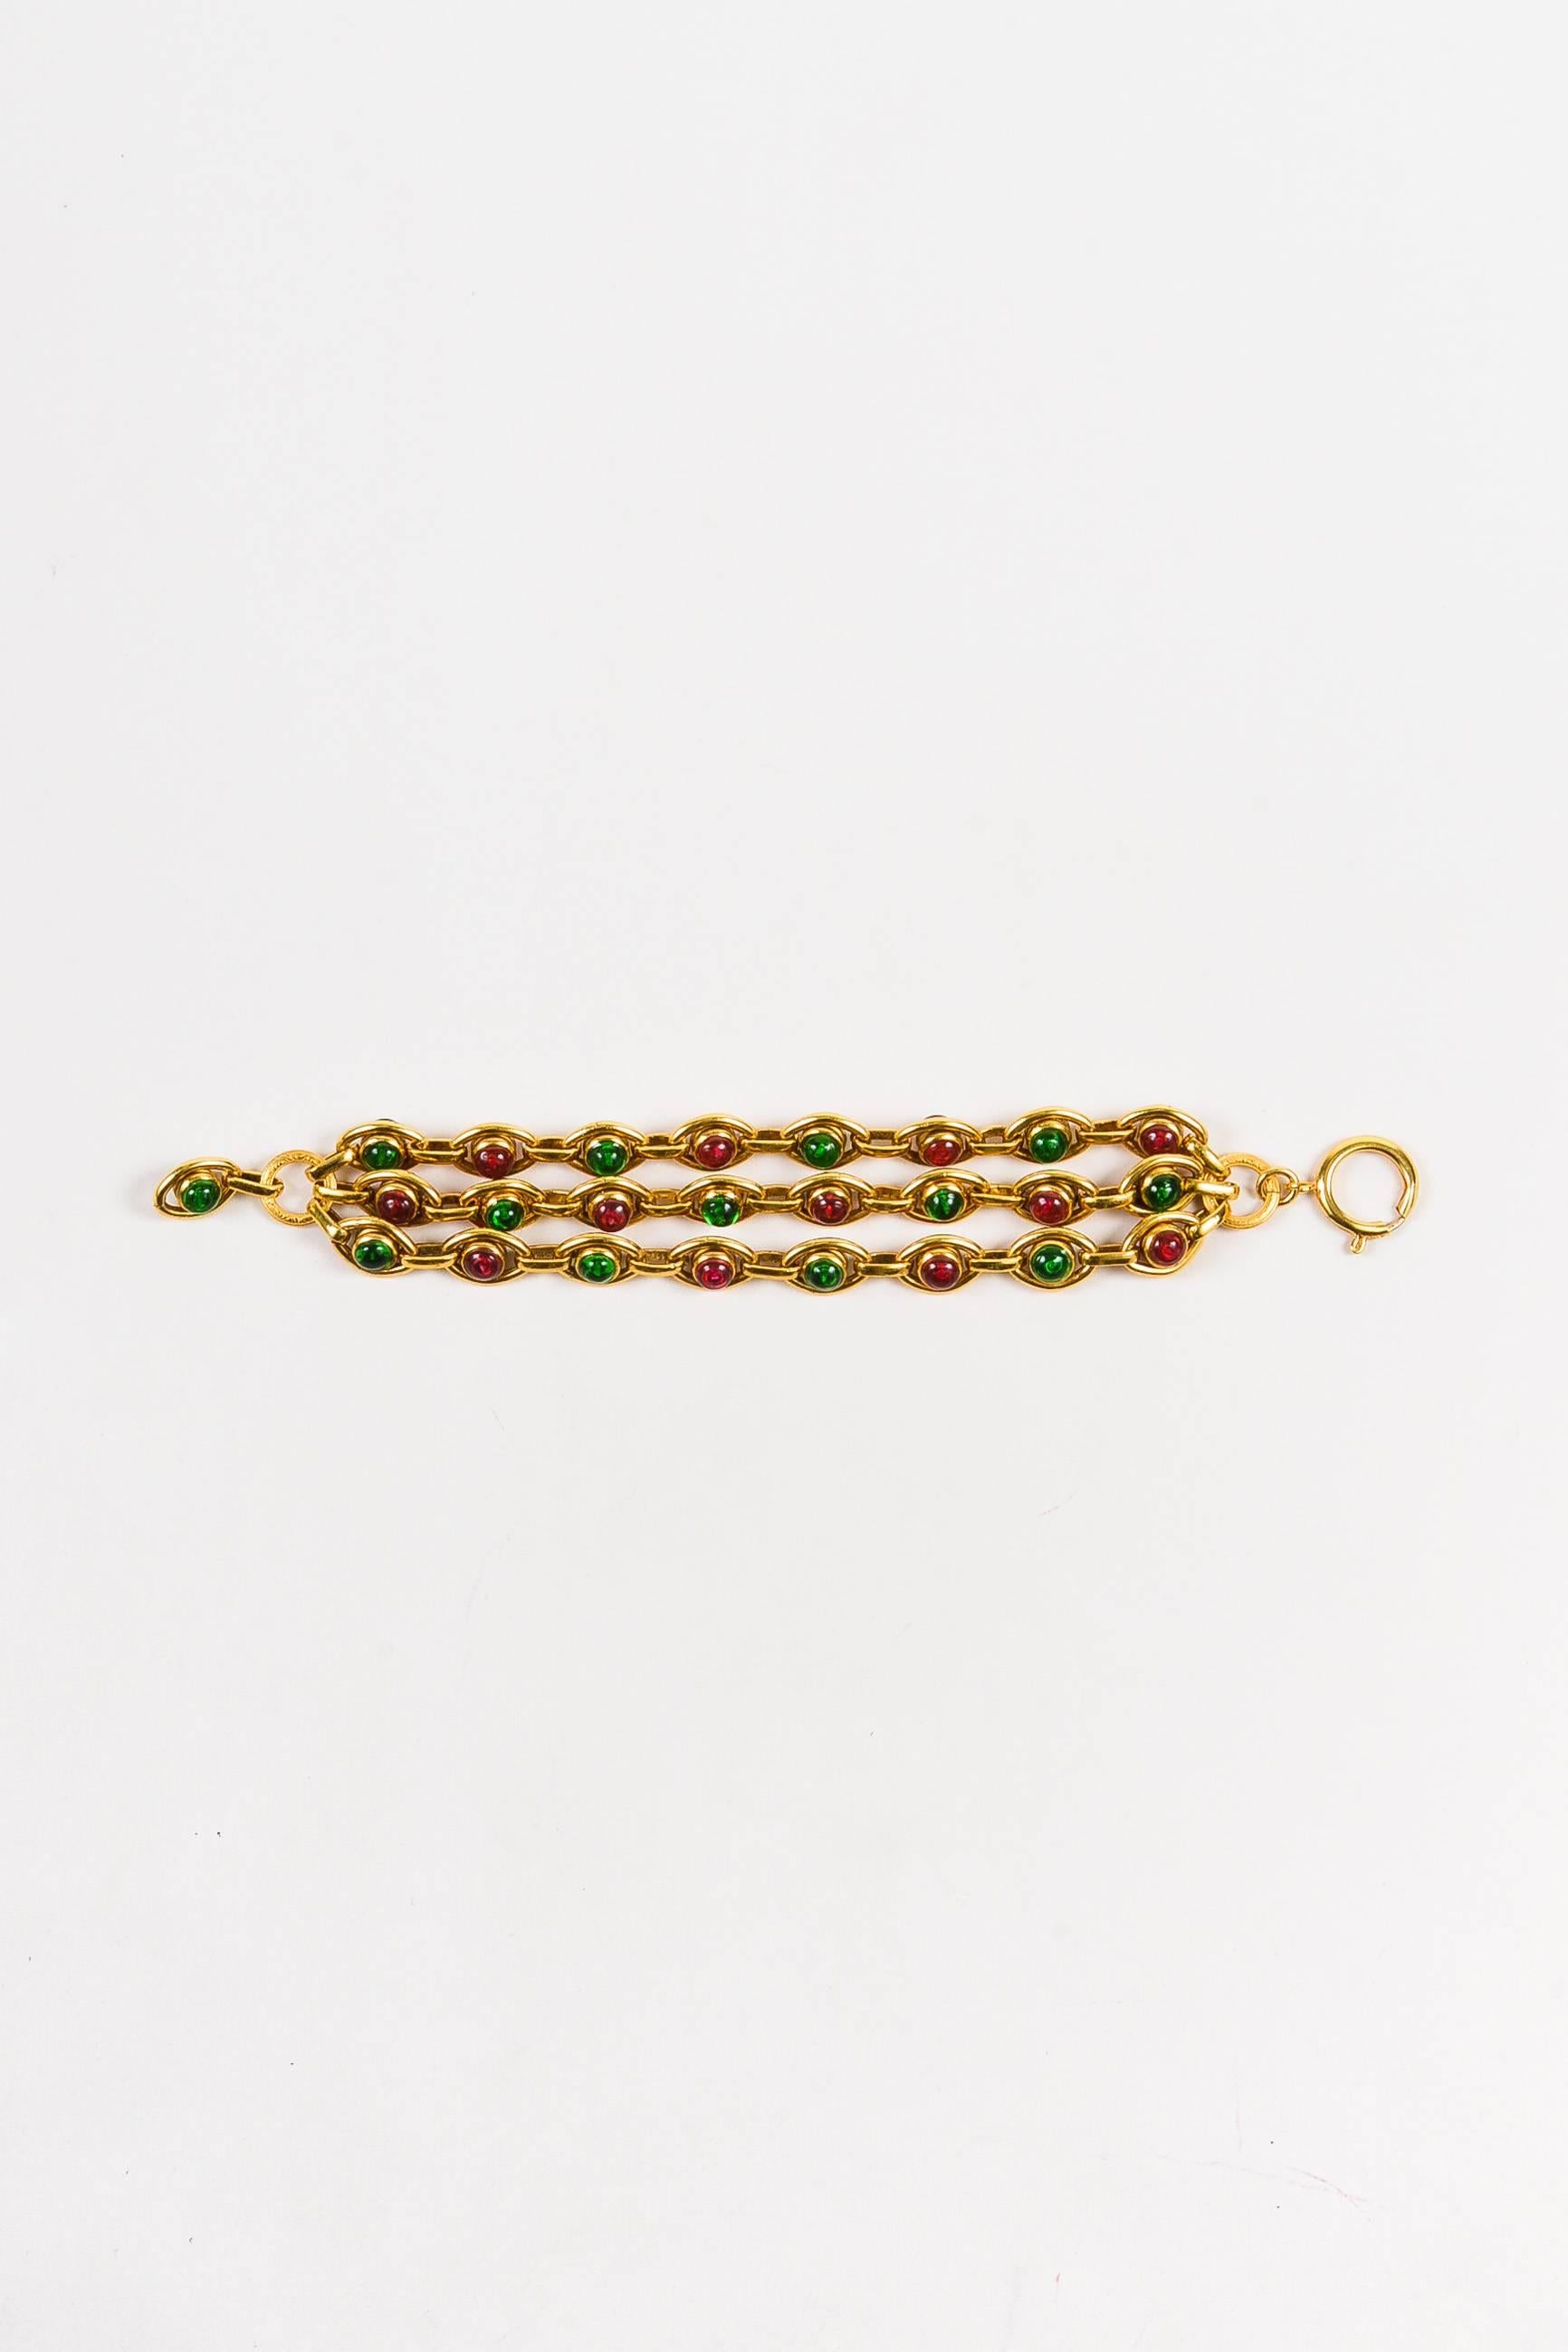 Intricate statement bracelet that exudes vintage Chanel sophistication. Gold-tone hardware. Multi-strand link chain. Bold pink and green Gripoix glass embellishment. Spring clasp closure.

Condition:
Pre-owned. Some signs of wear and tear. Brand